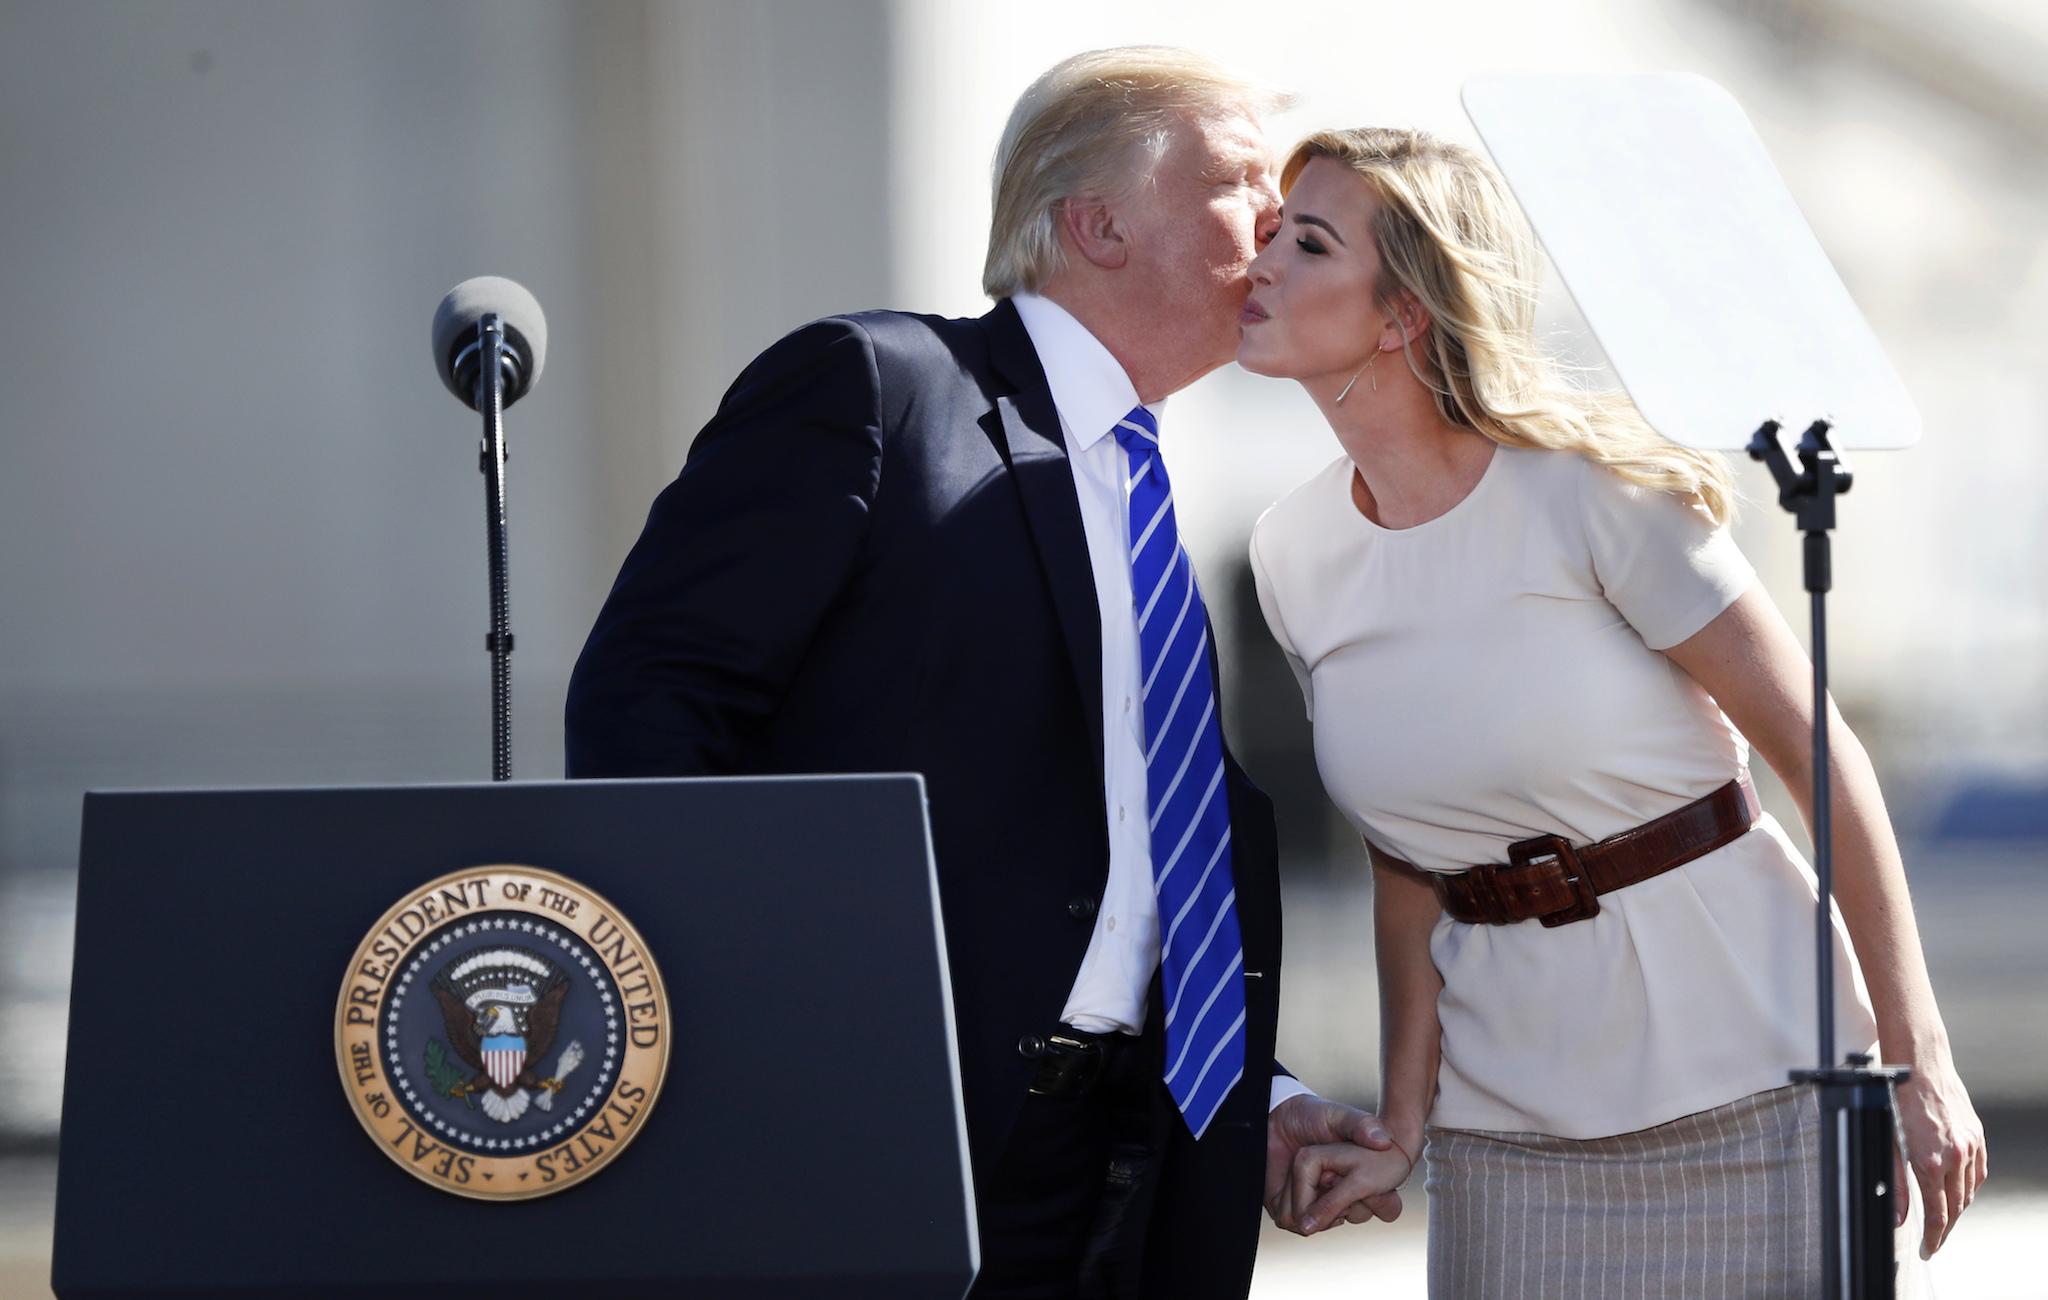 President Donald Trump kisses his daughter Ivanka, right, before speaking about tax reform